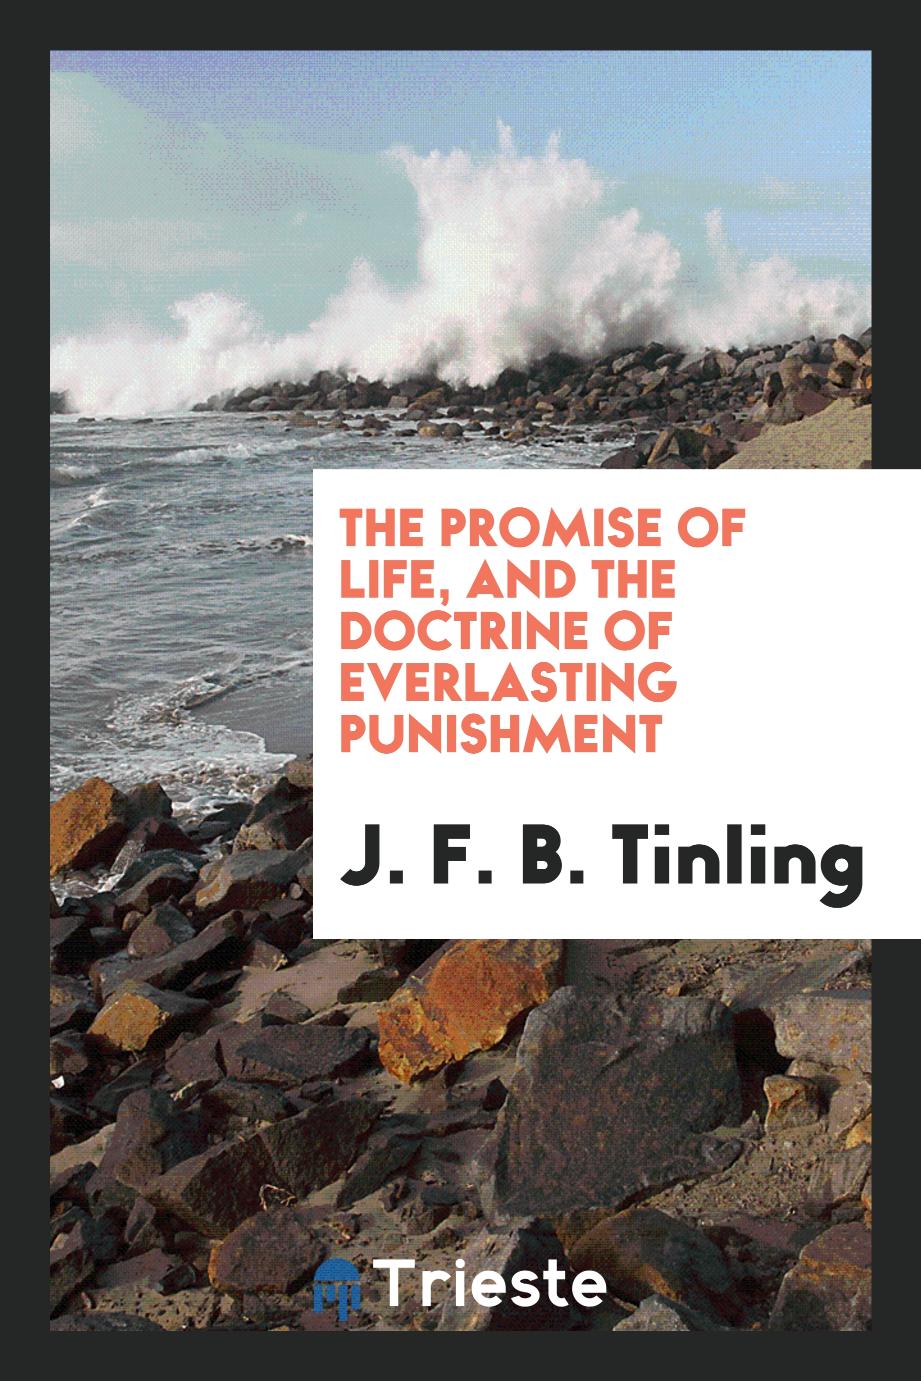 The Promise of Life, and the Doctrine of Everlasting Punishment